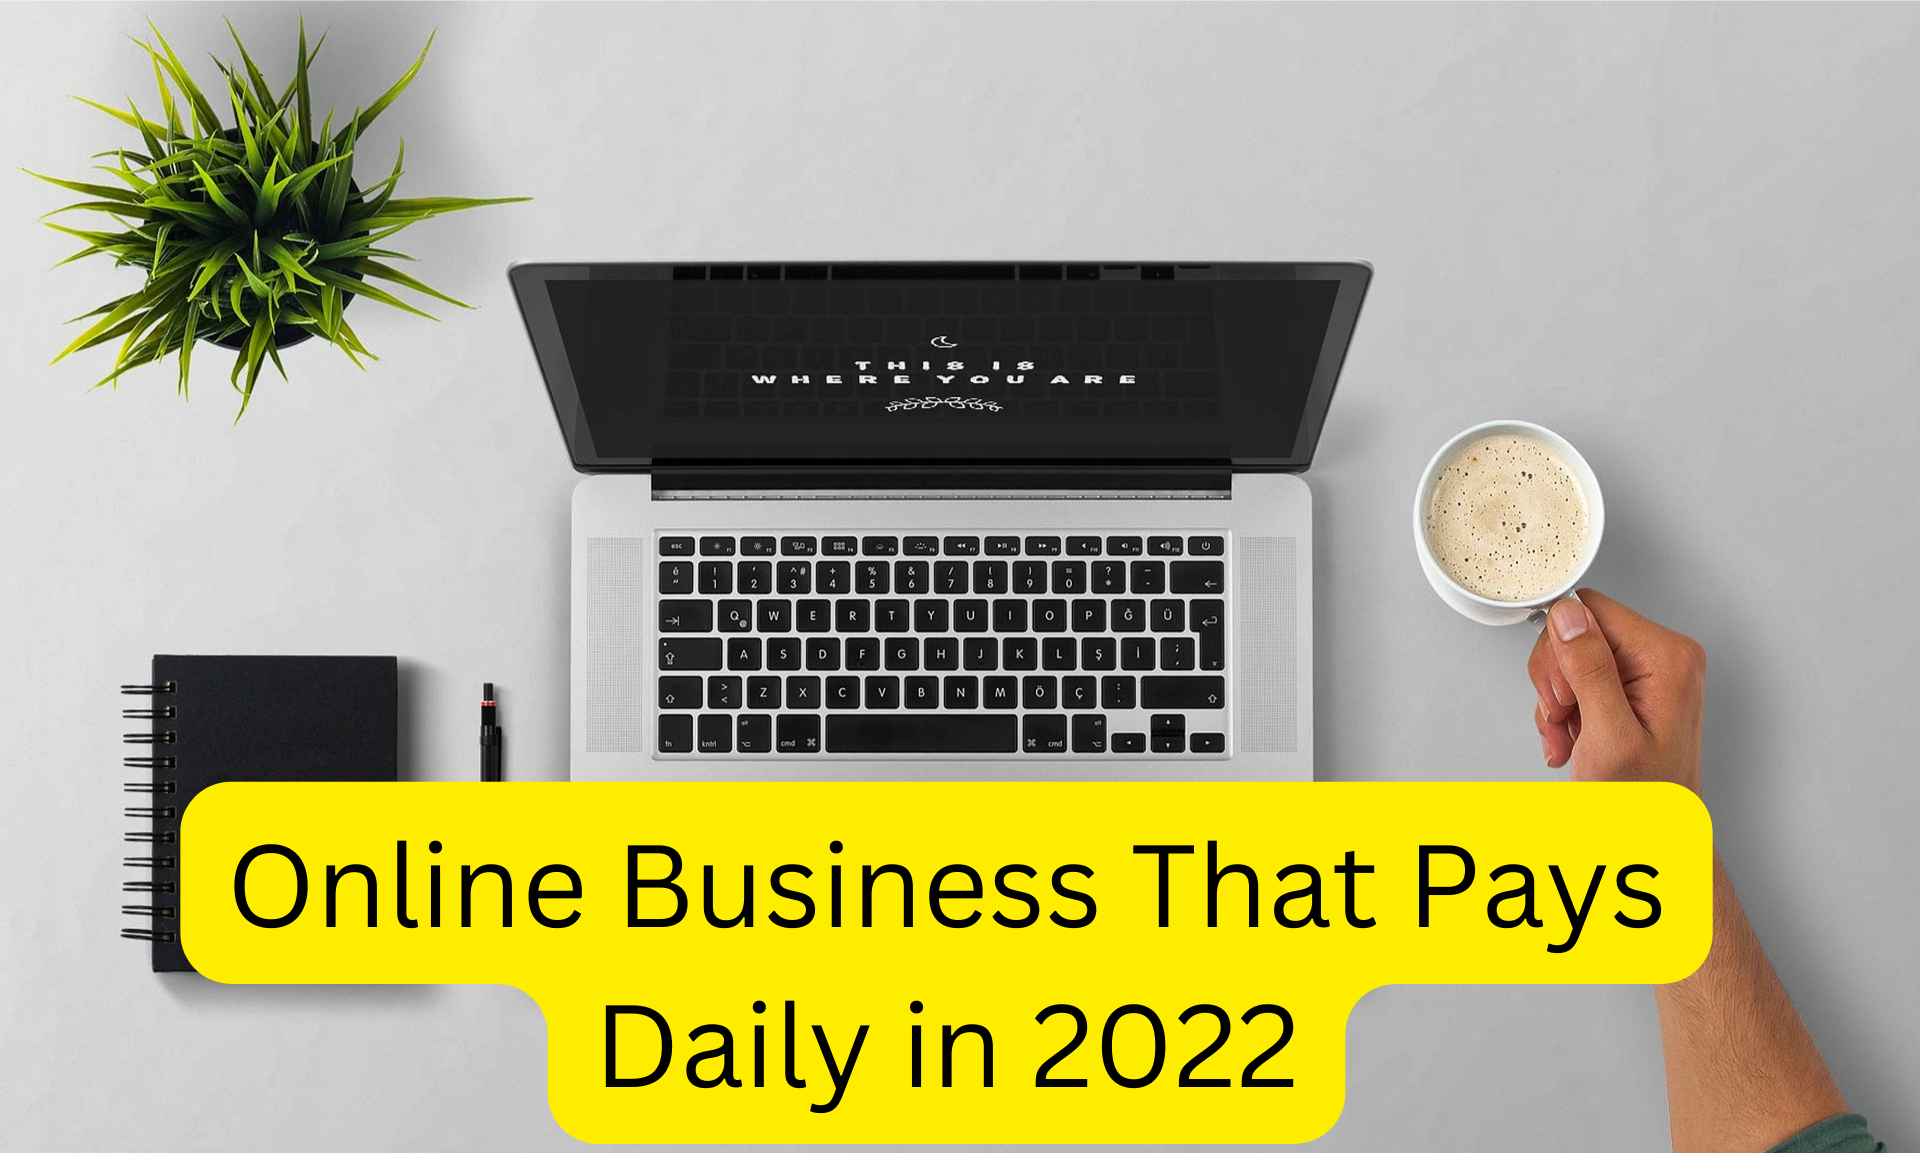 Online Business That Pays Daily